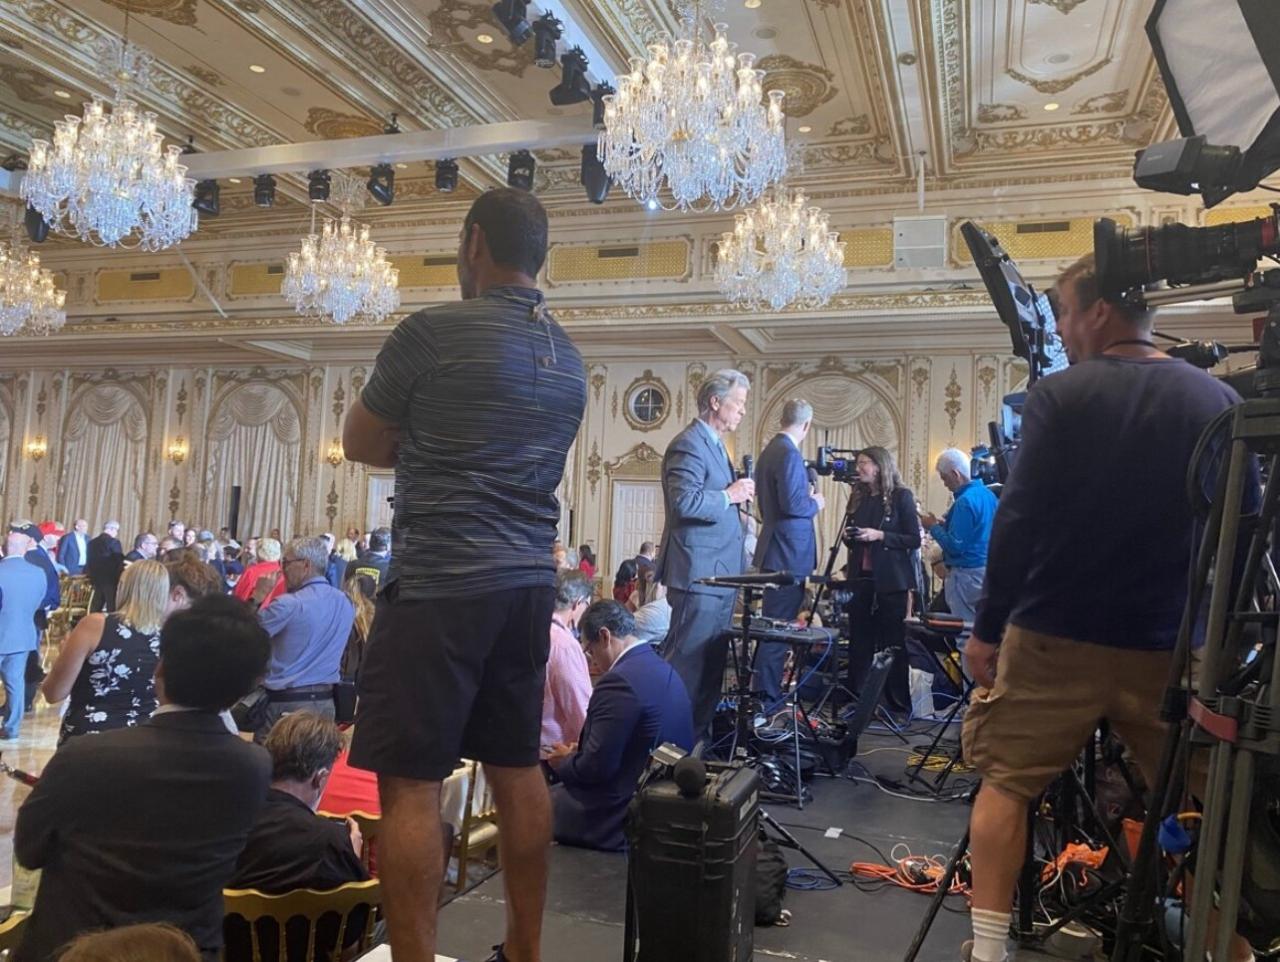 EXCLUSIVE: Who’s In the Crowd at Mar-a-Lago Tonight for President Trump’s Big Announcement – Photos by TGP’s Joe Hoft